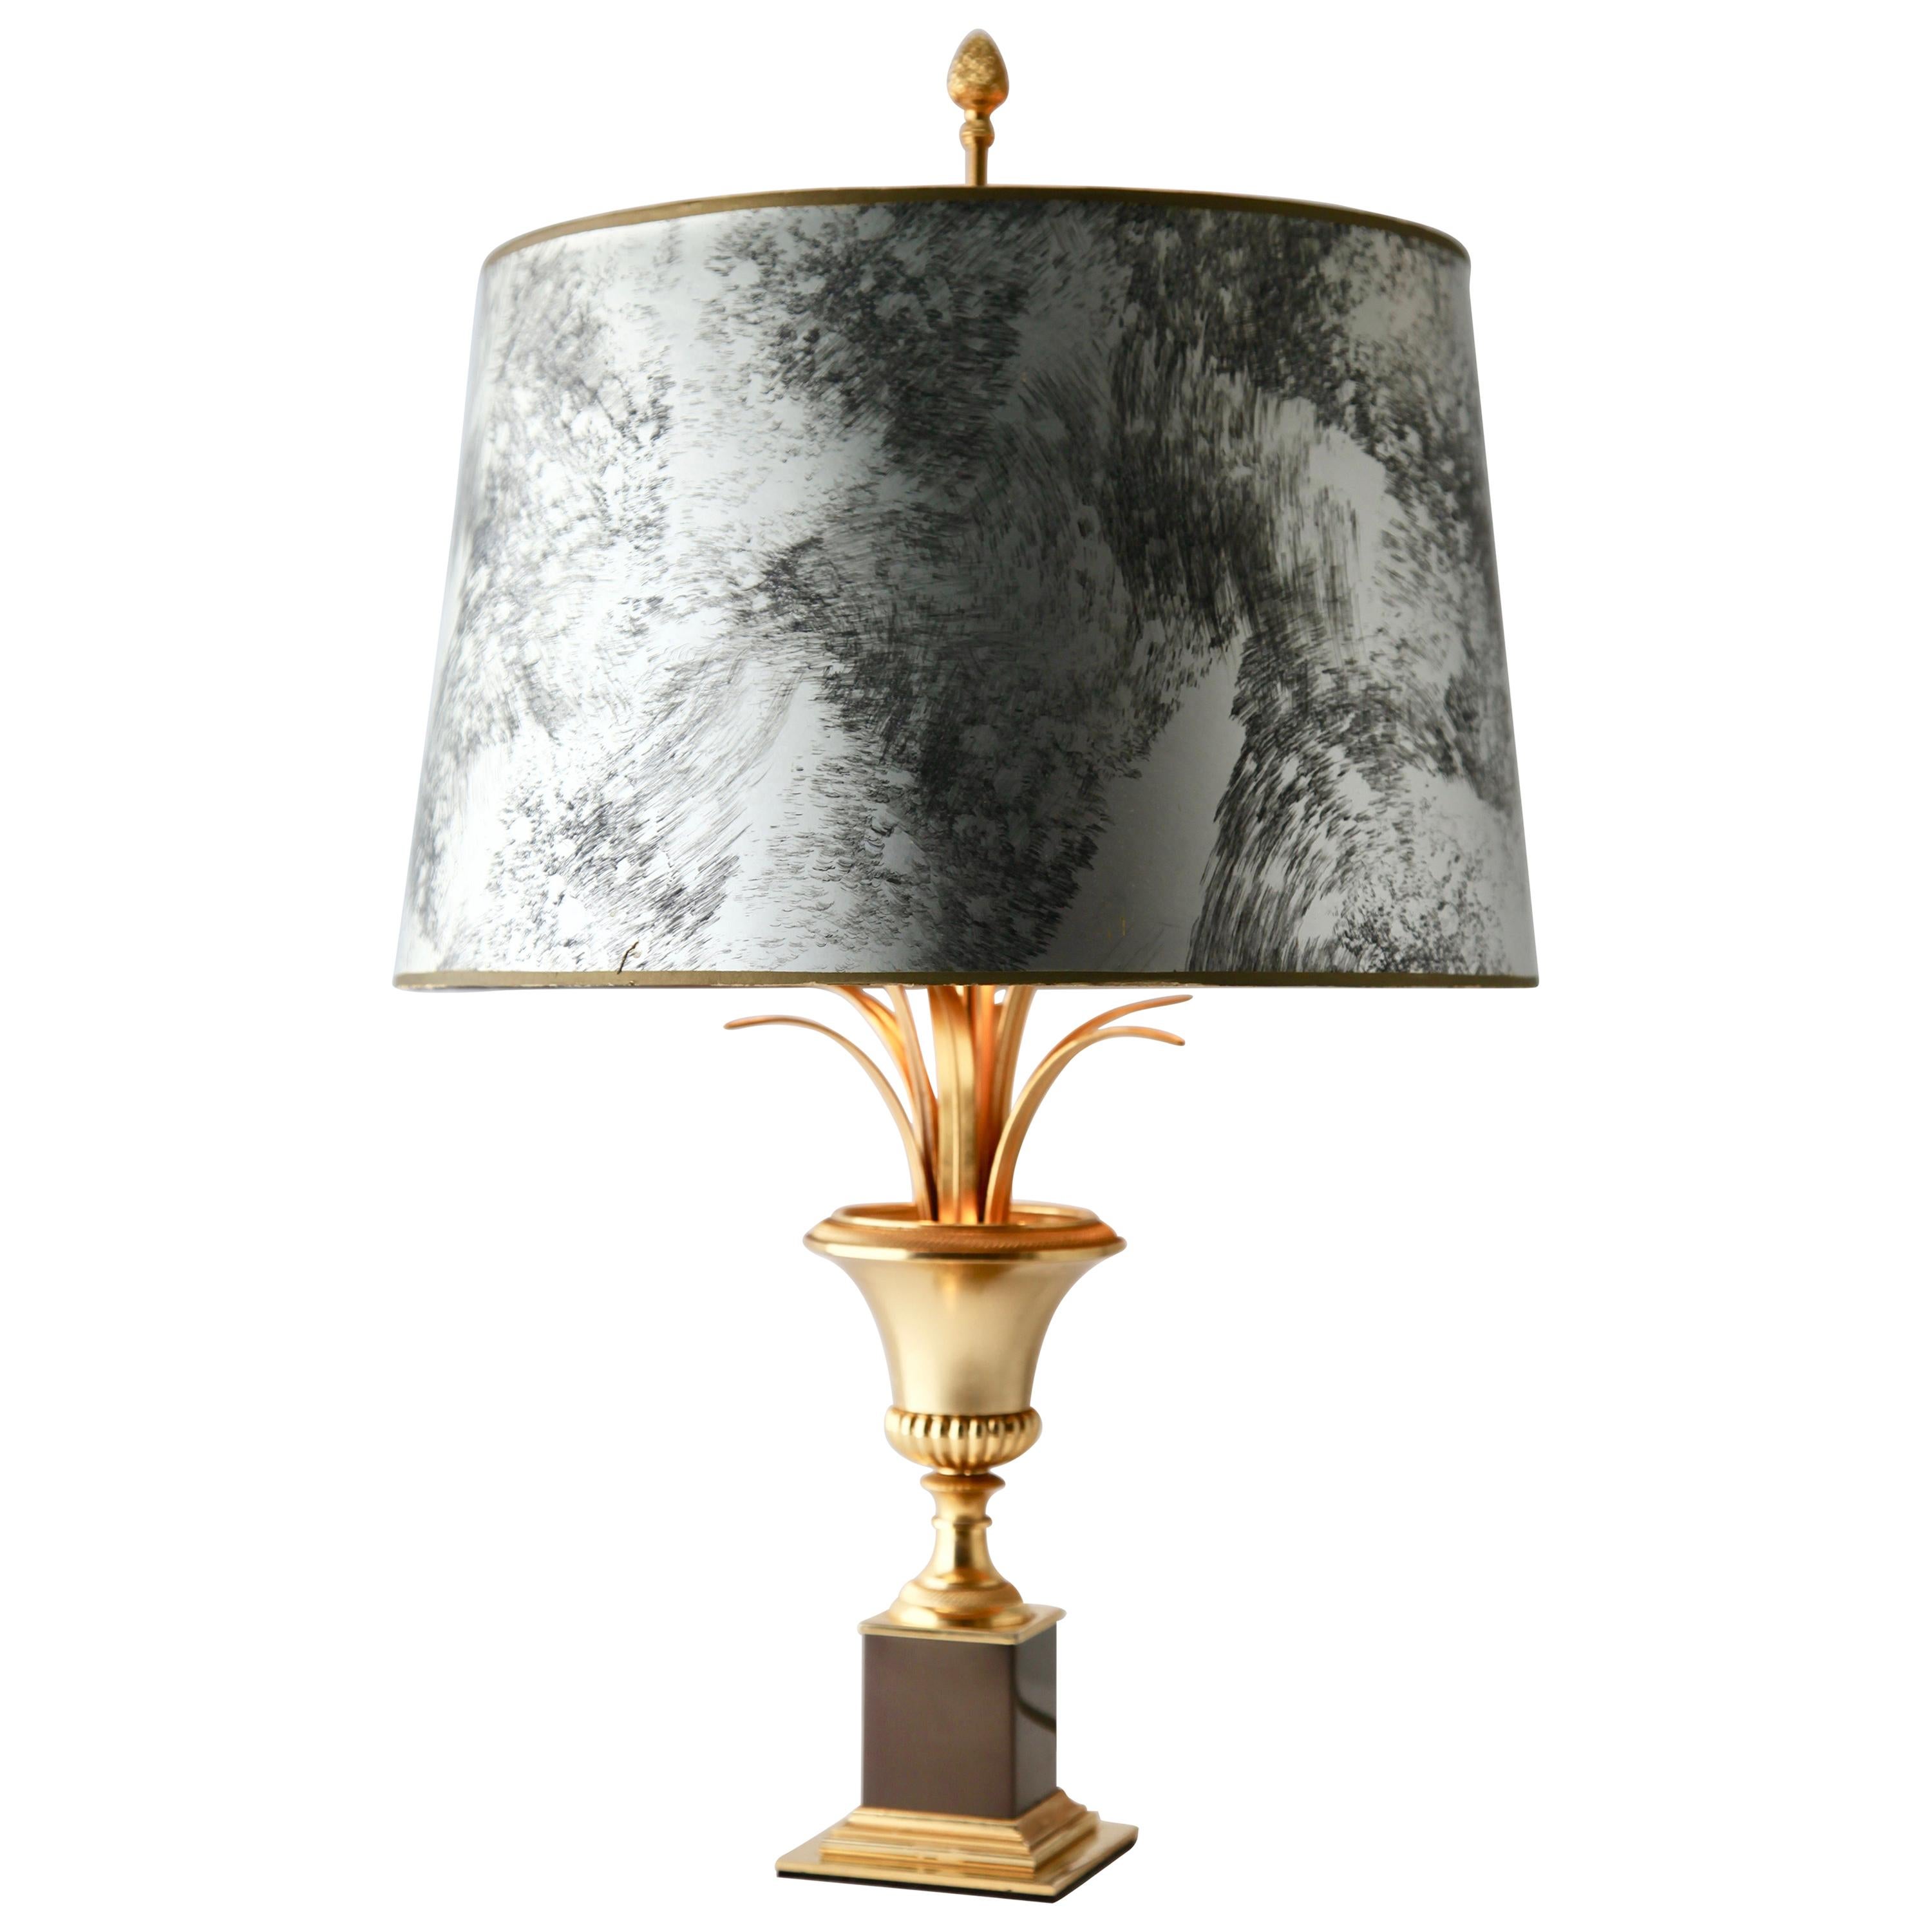 Hollywood Regency Sculptural Brass Palm Tree Table Lamp style of Maison Jansen